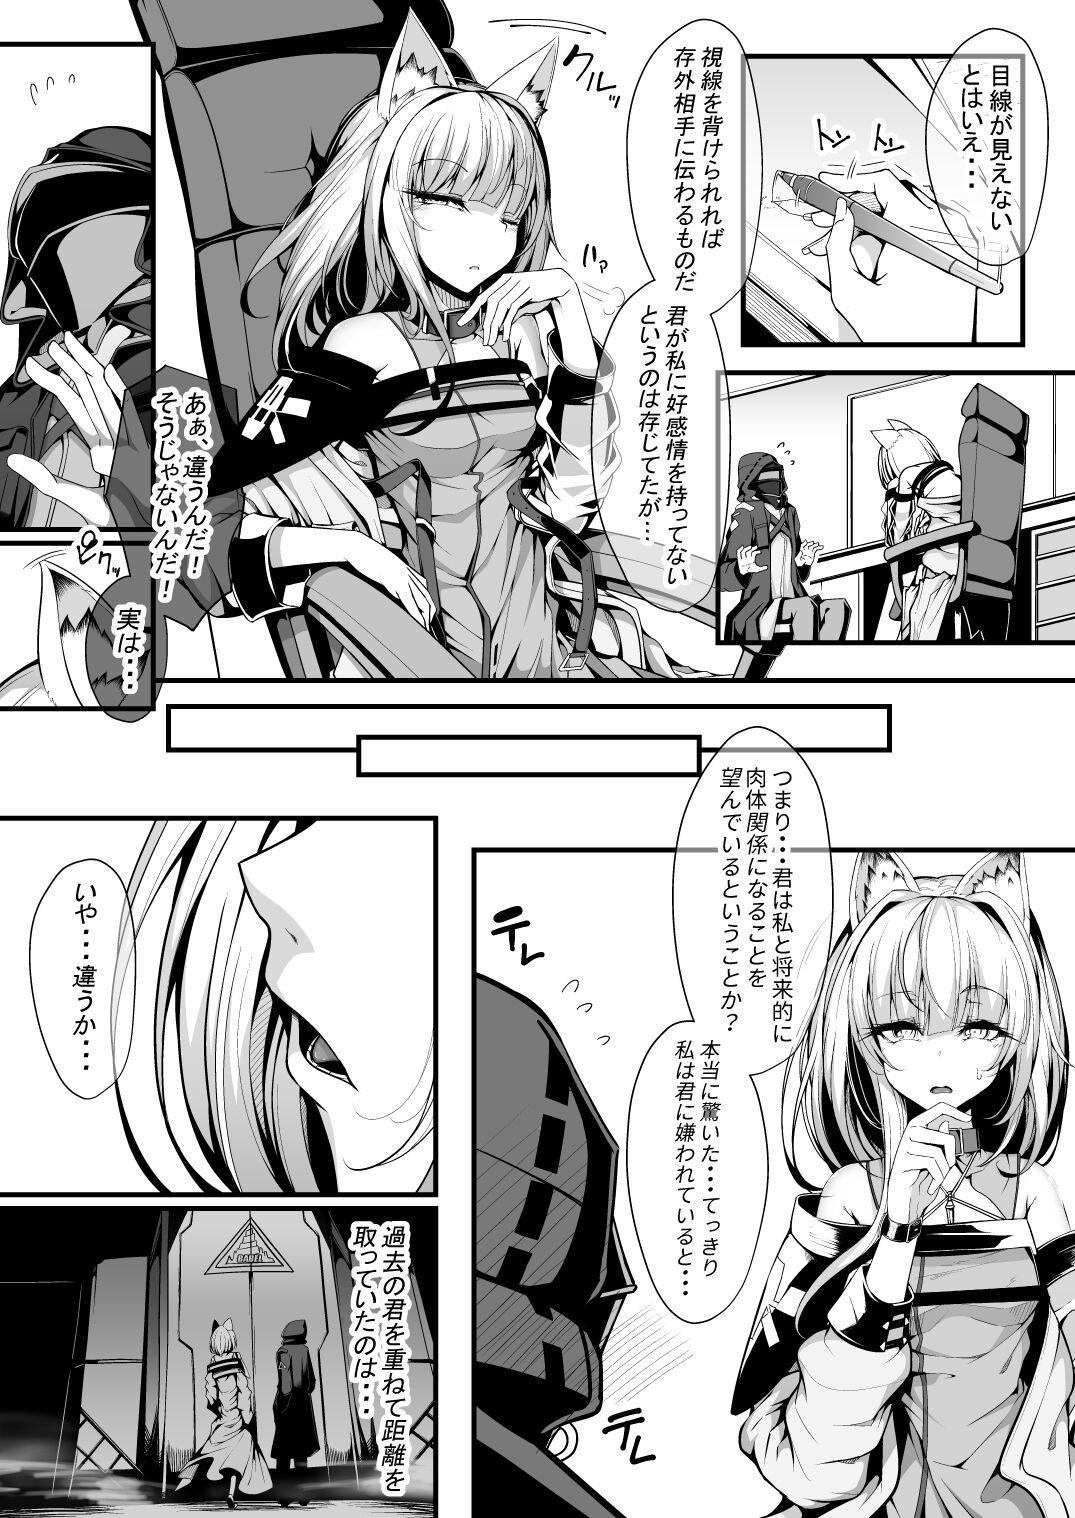 Flash M.P. Vol. 22 - Arknights Leche - Page 8